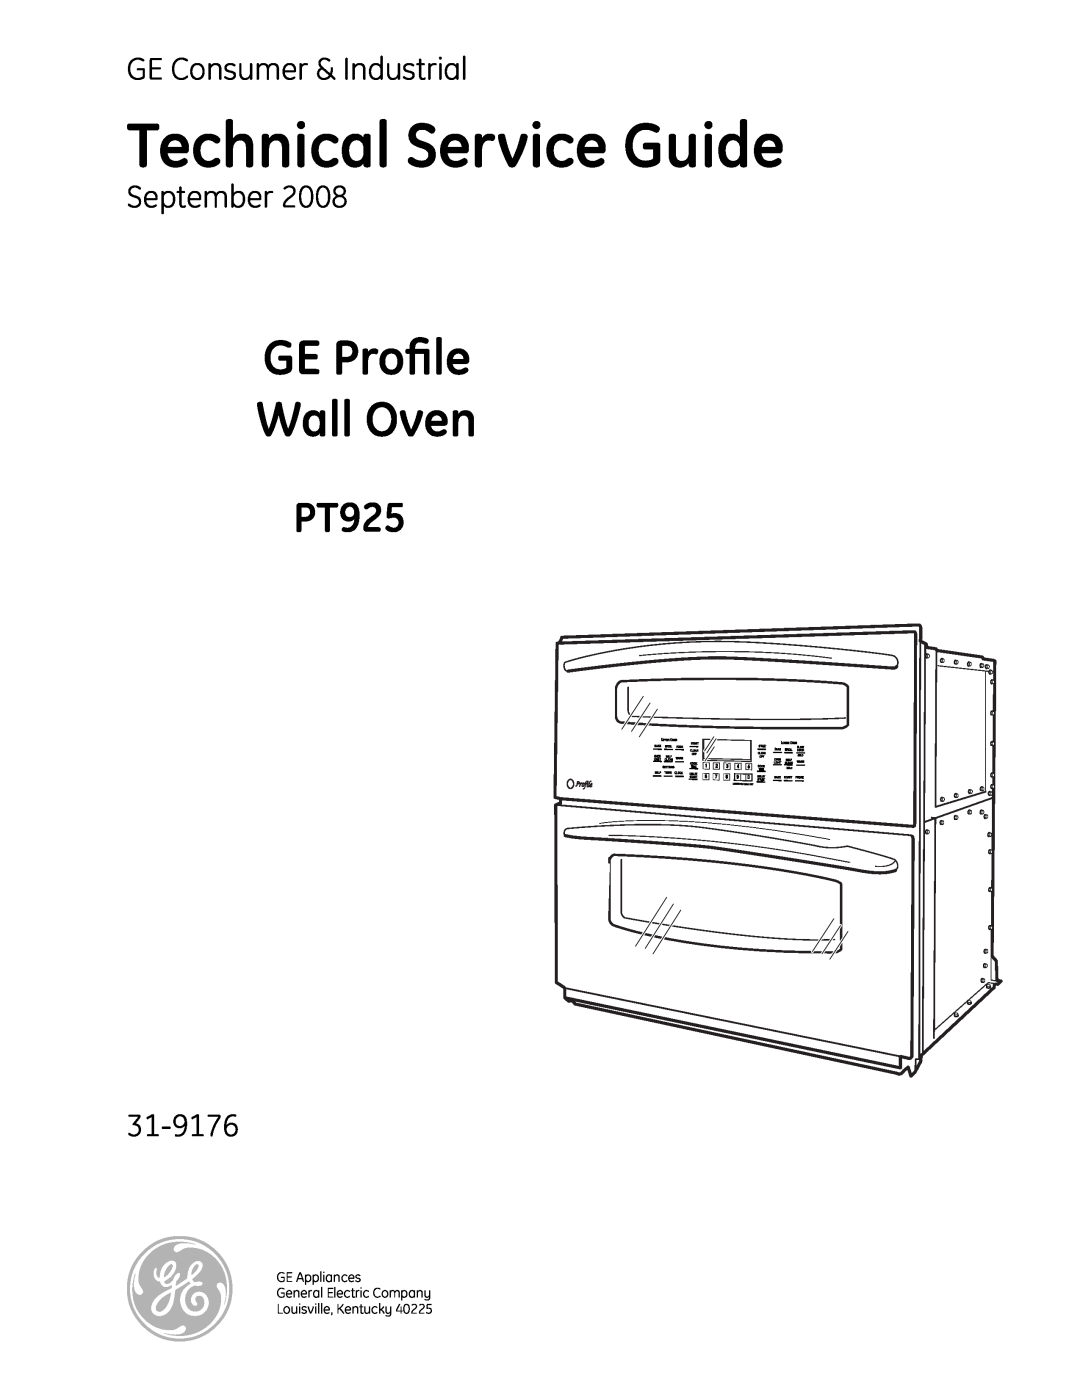 GE PT925 manual Technical Service Guide, GE Proﬁle Wall Oven, GE Consumer & Industrial, September, 31-9176 